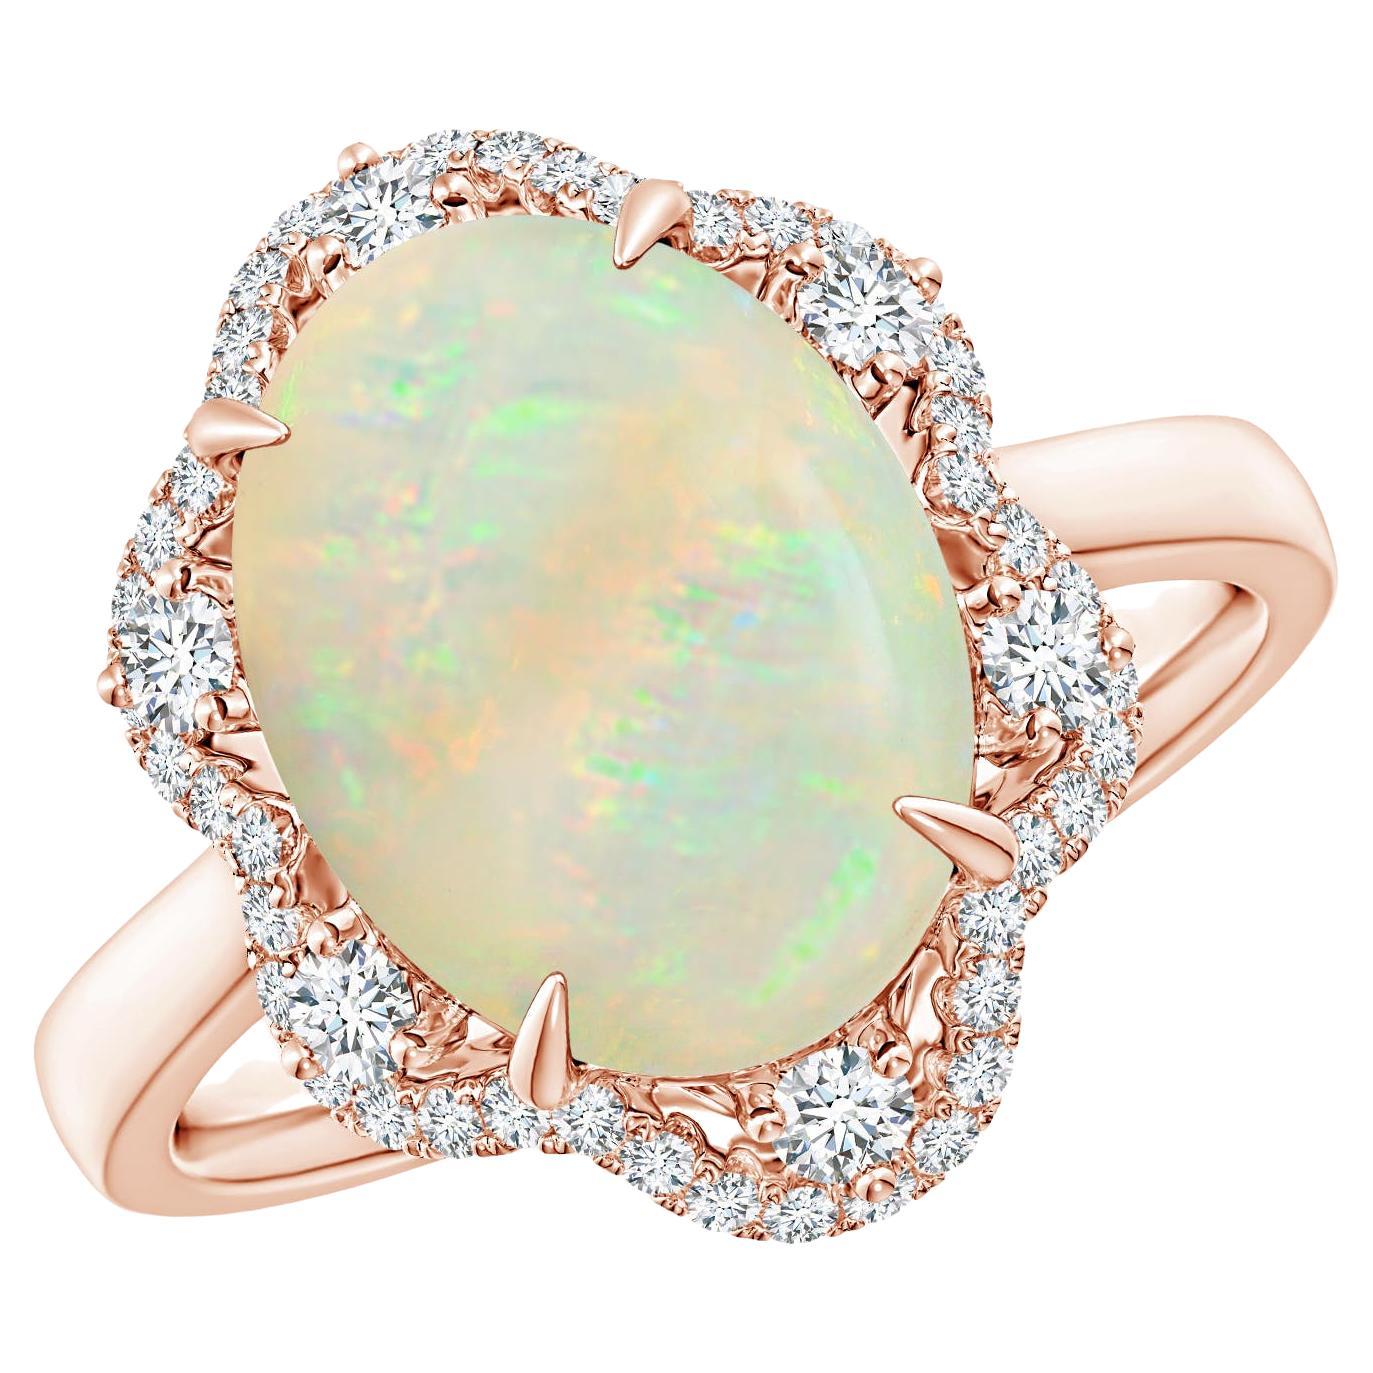 For Sale:  Angara Gia Certified Natural Opal Ring in Rose Gold with Reverse Tapered Shank